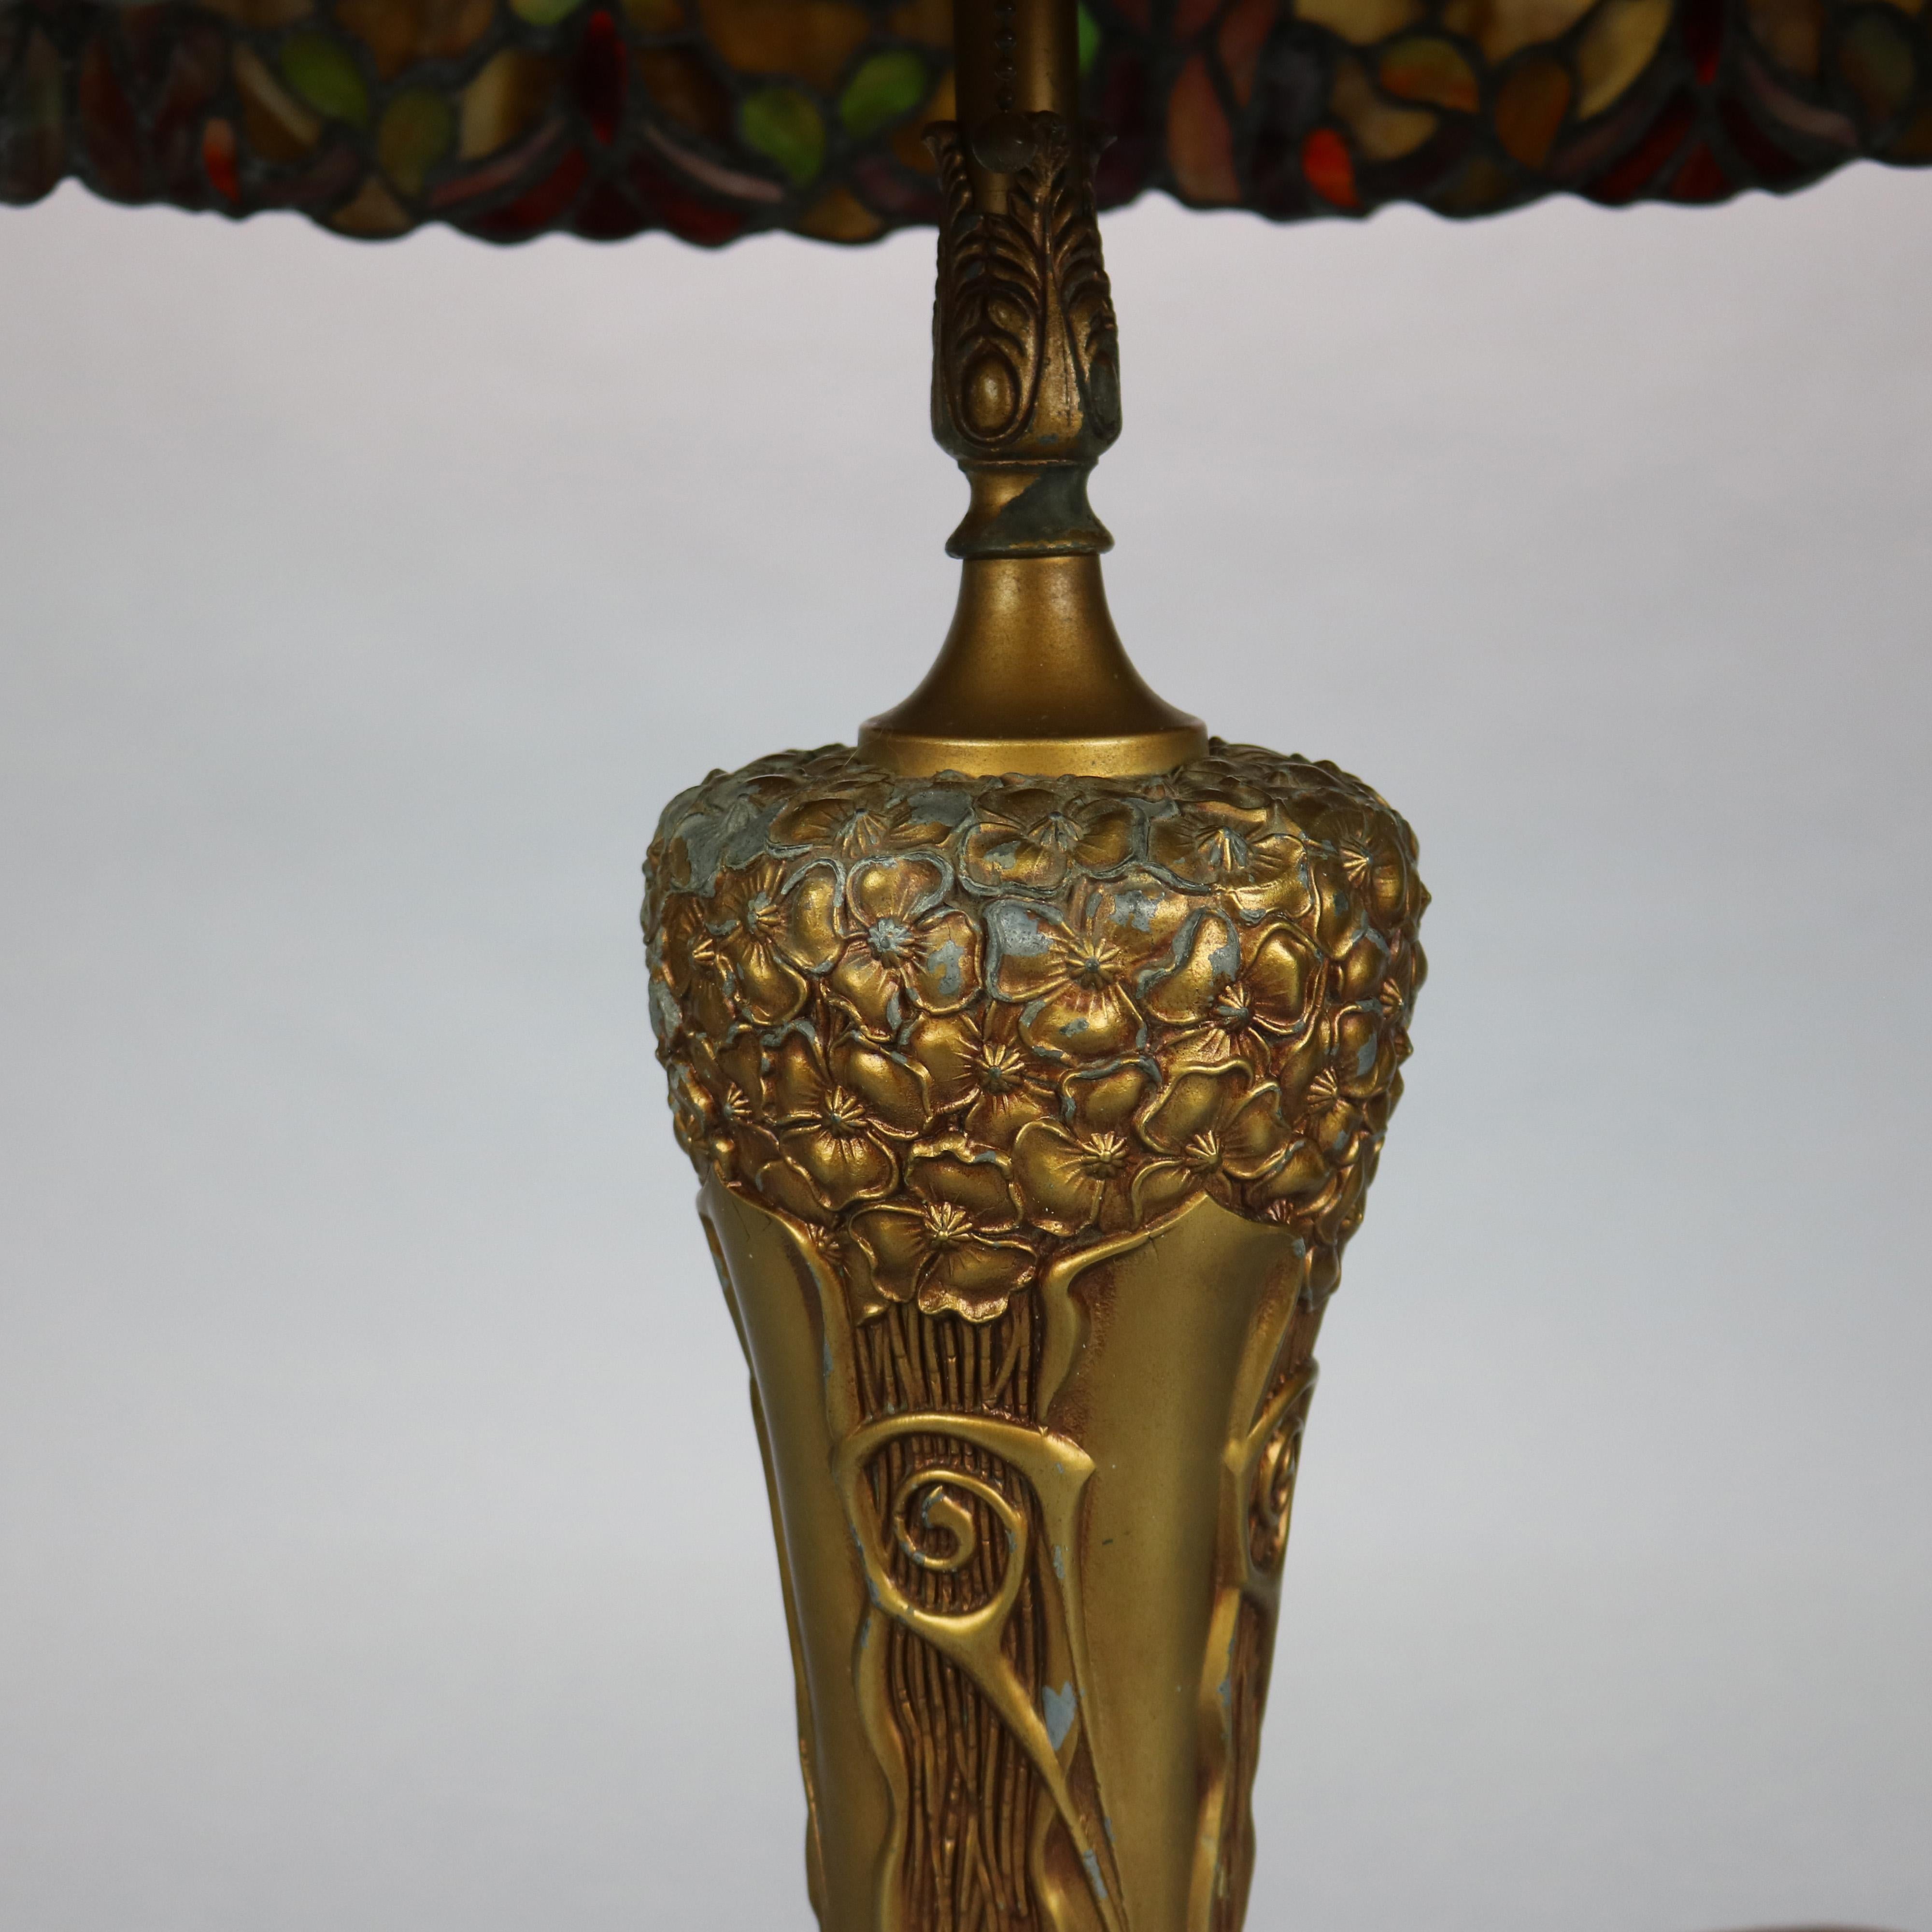 Cast Arts & Crafts Pittsburgh Lamp Base with Mosaic Leaded Glass Shade, c 1910